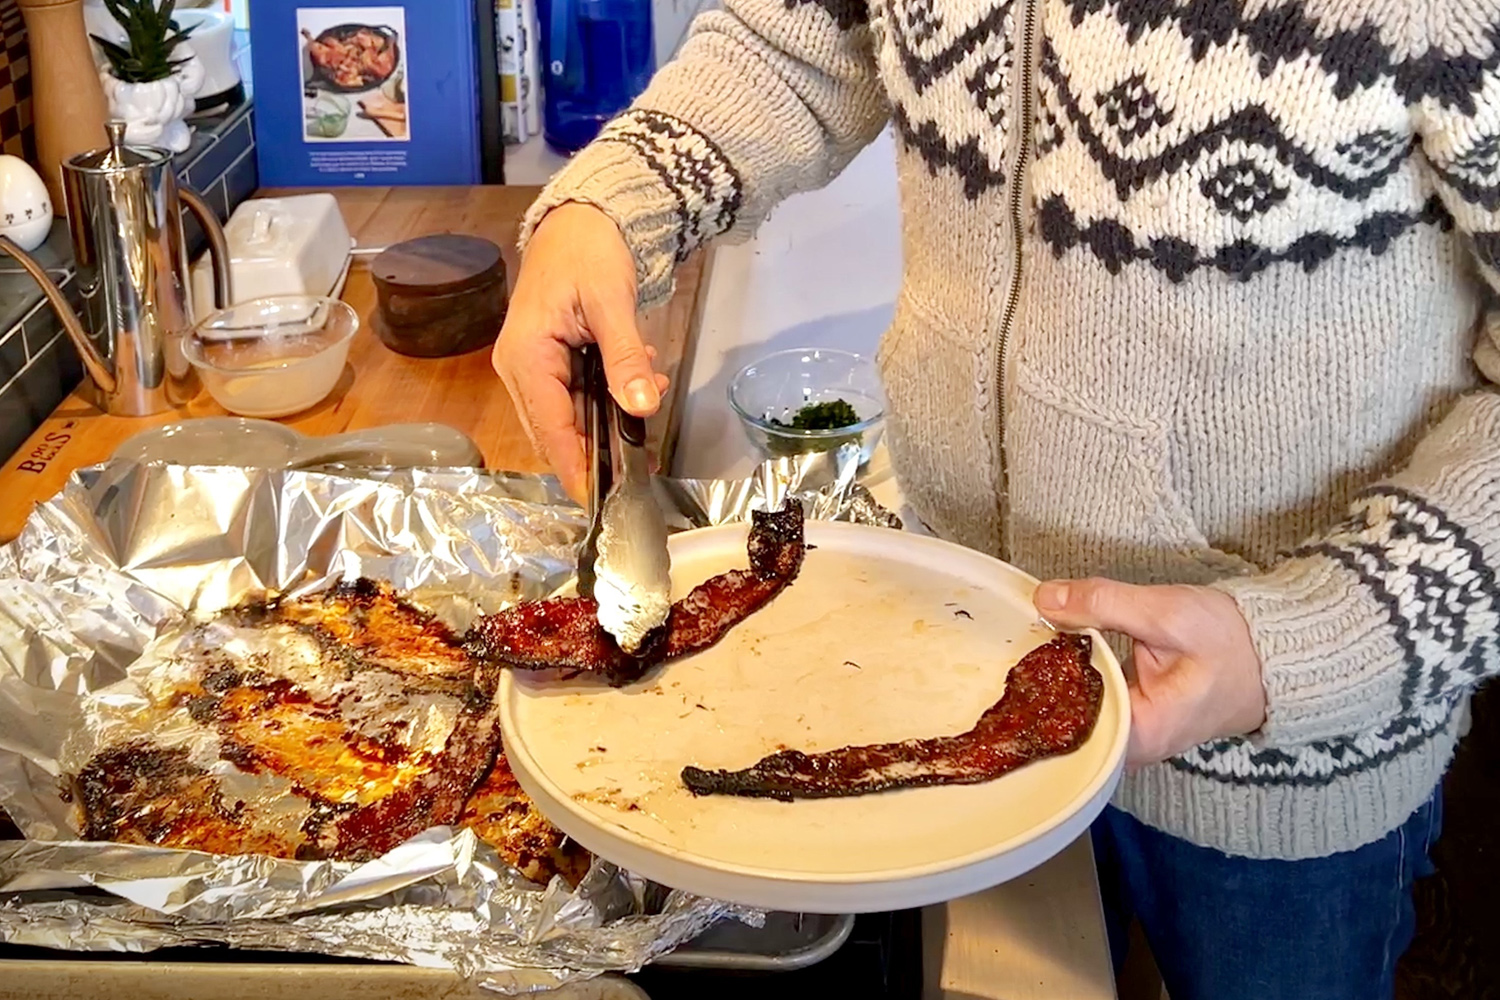 Man cooking maple peppered bacon on dish with eggs